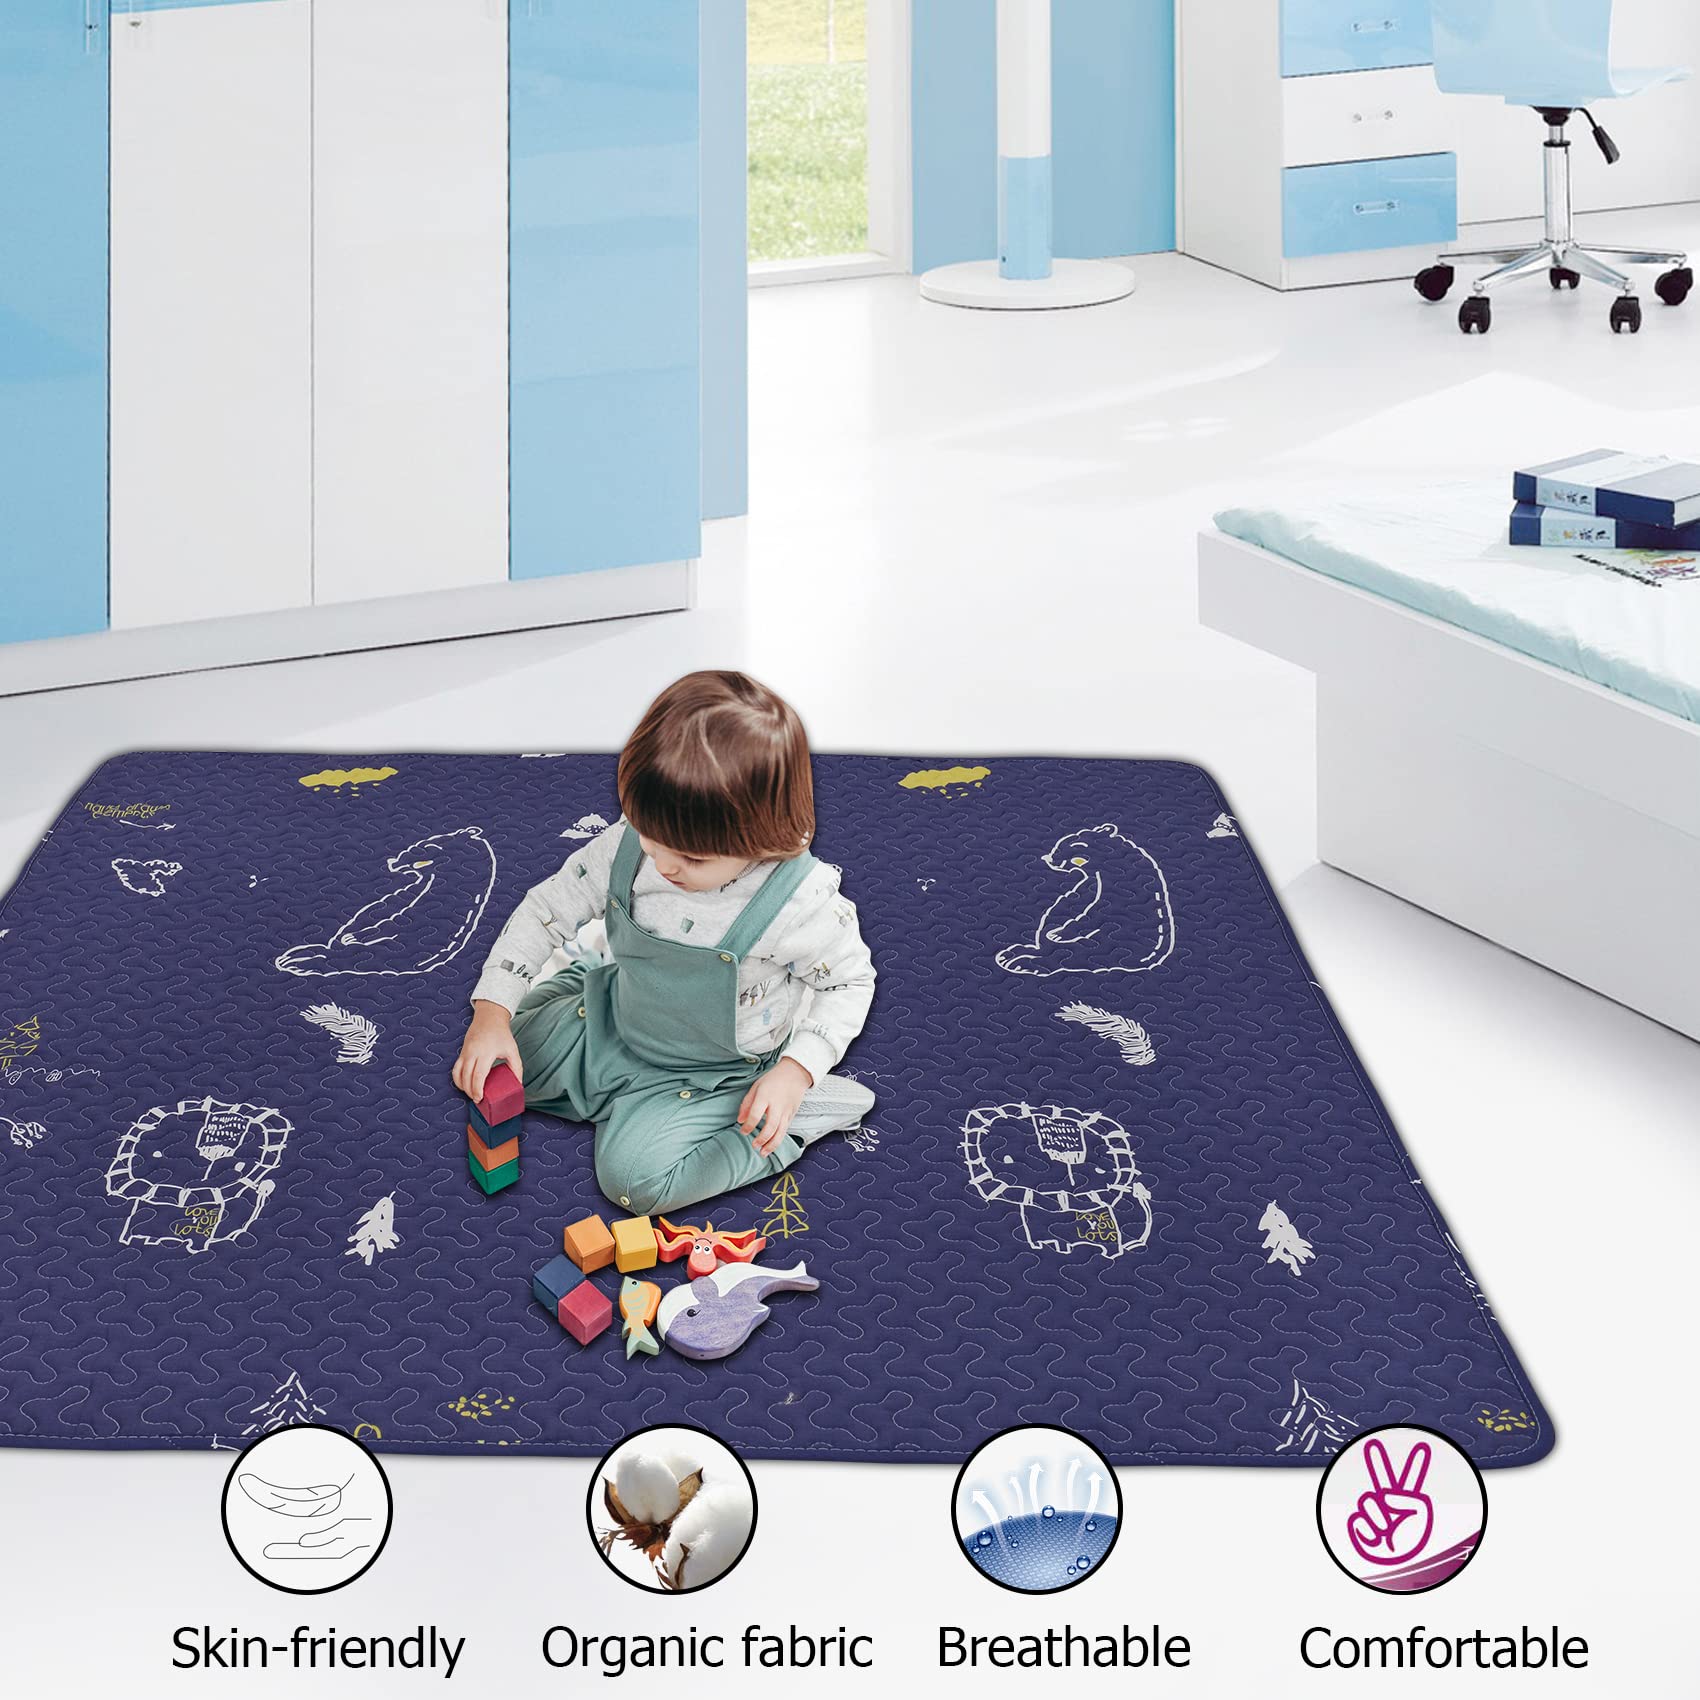 Portable Baby Play Mat Machine Washable, Foldable Crawling Mat for Floor 43x43” Baby Playpen Mat, Soft Non Slip Non-Toxic Playmats for Infants, Kids Tent Mat Square